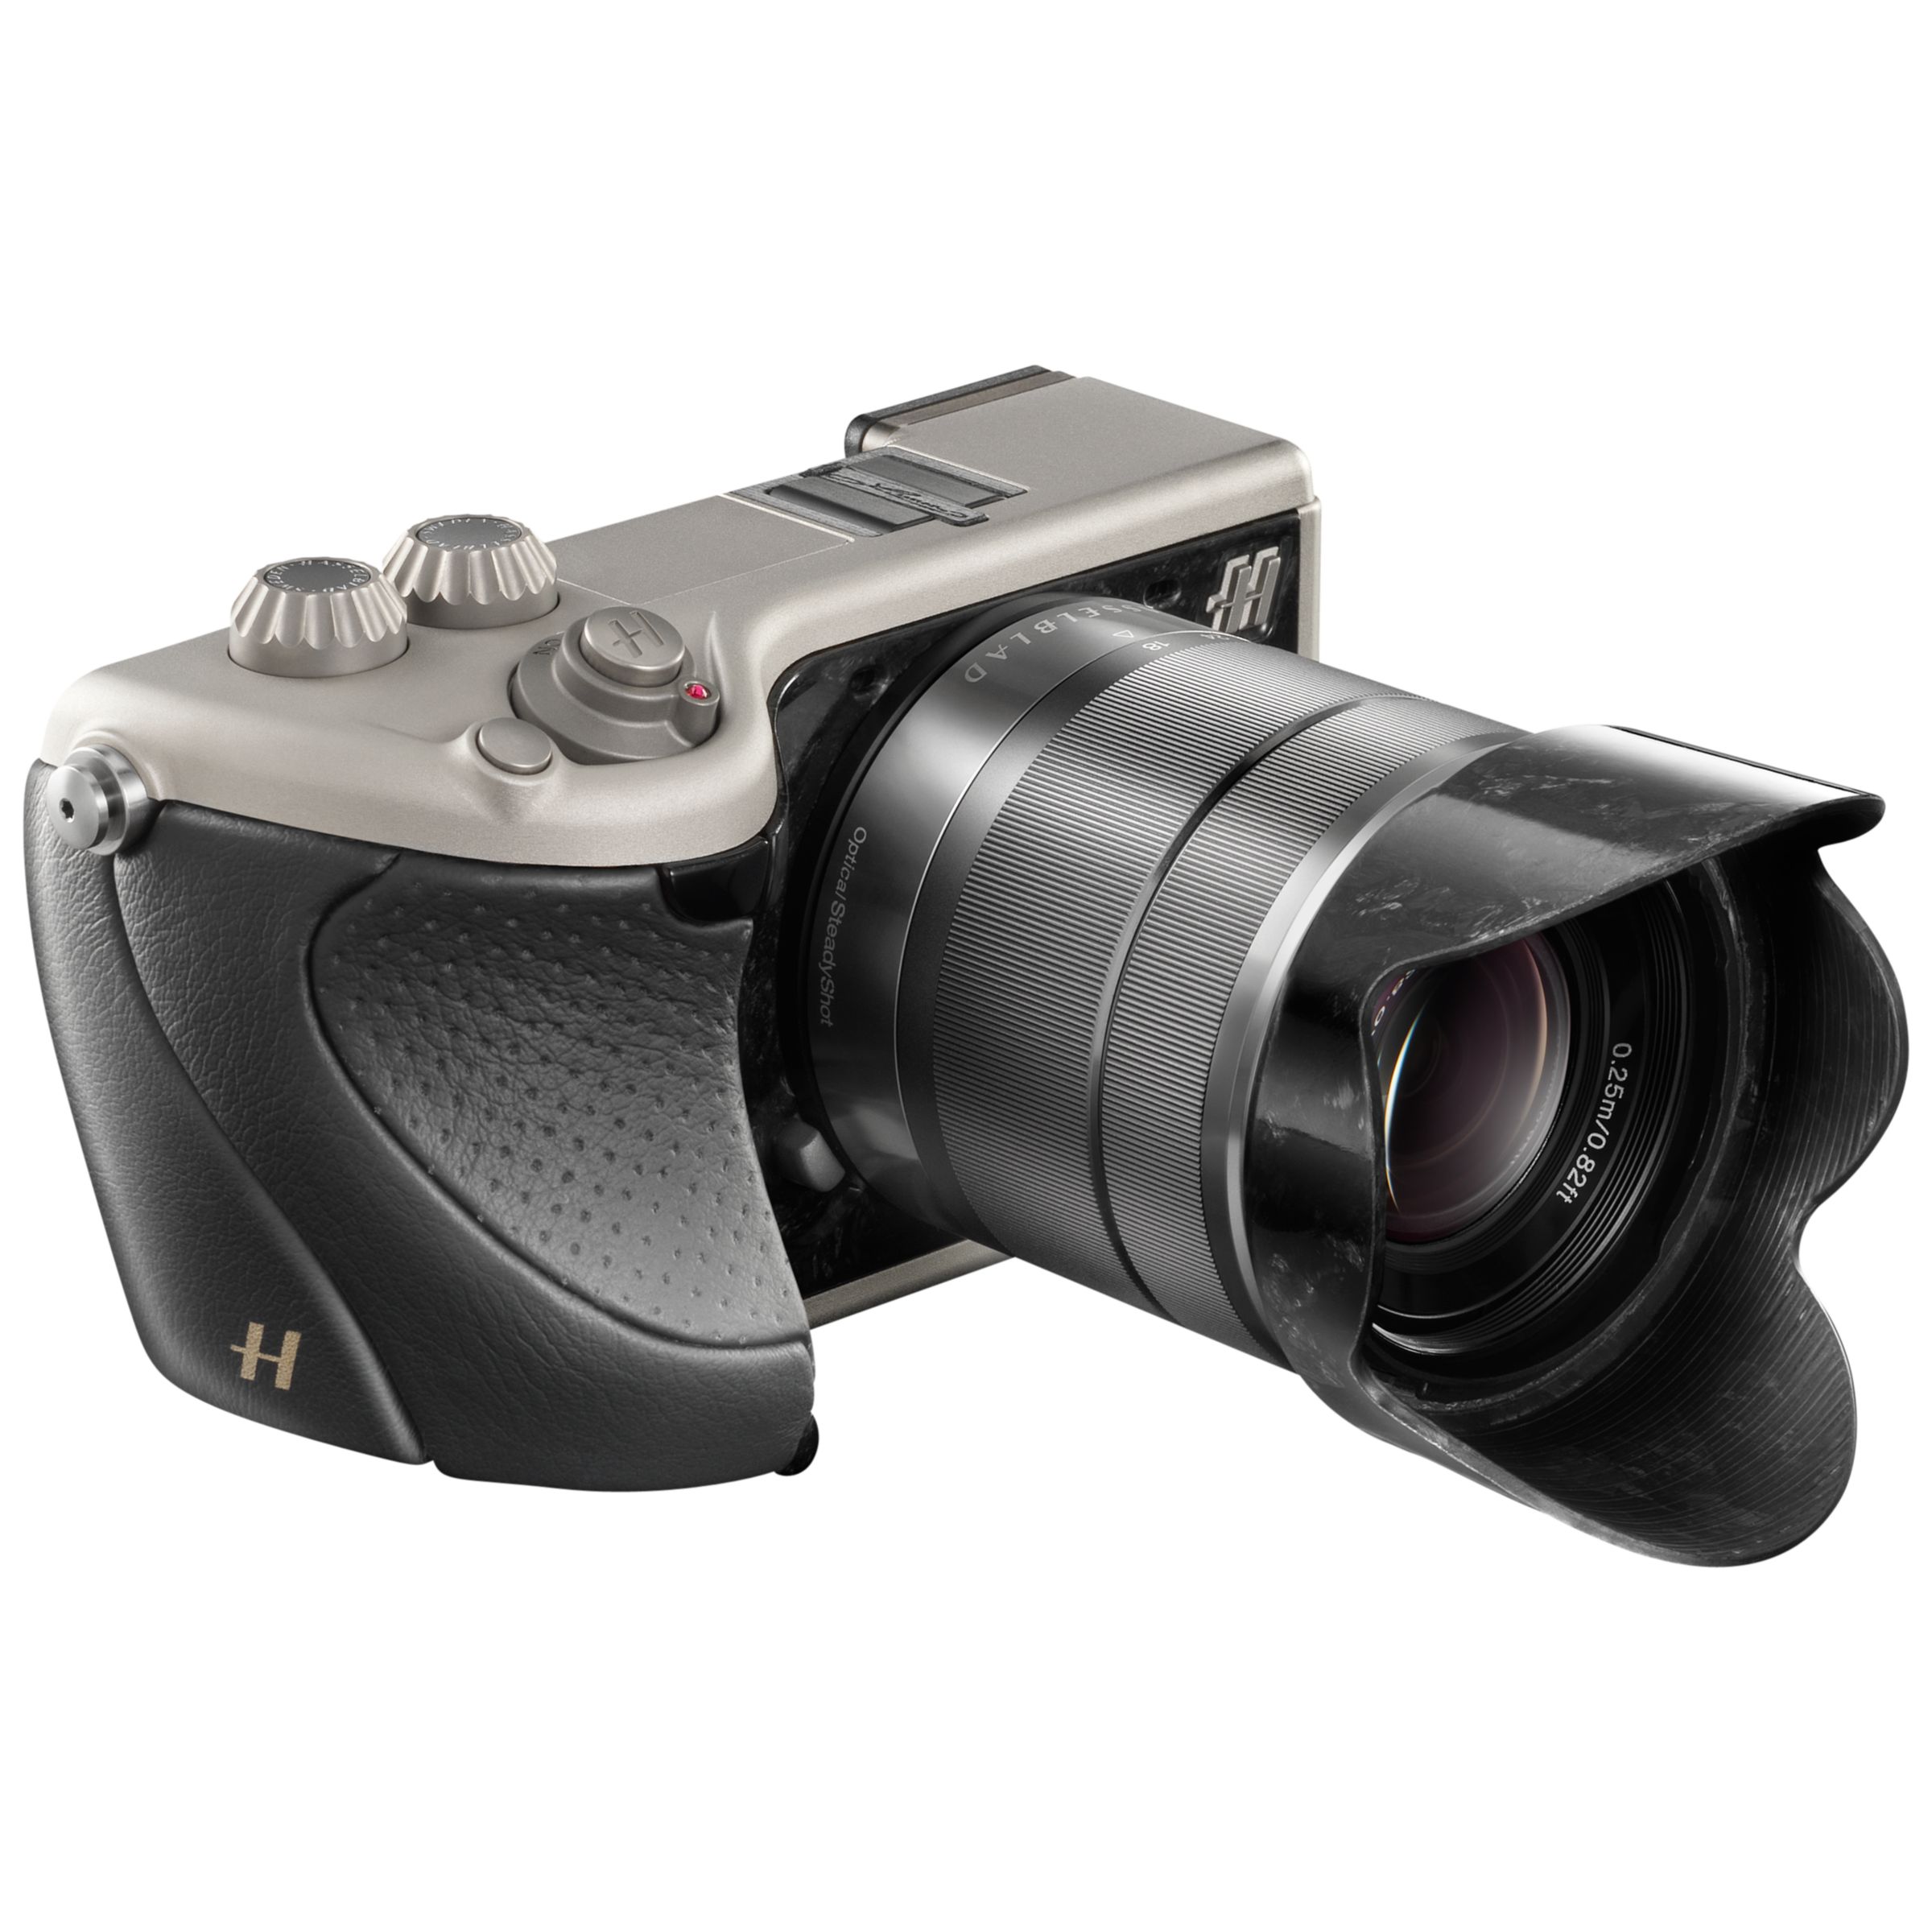 Hasselblad Lunar Compact System Camera with 18-55mm Lens, HD 1080p, 24.3MP, EVF, 3" LCD Screen